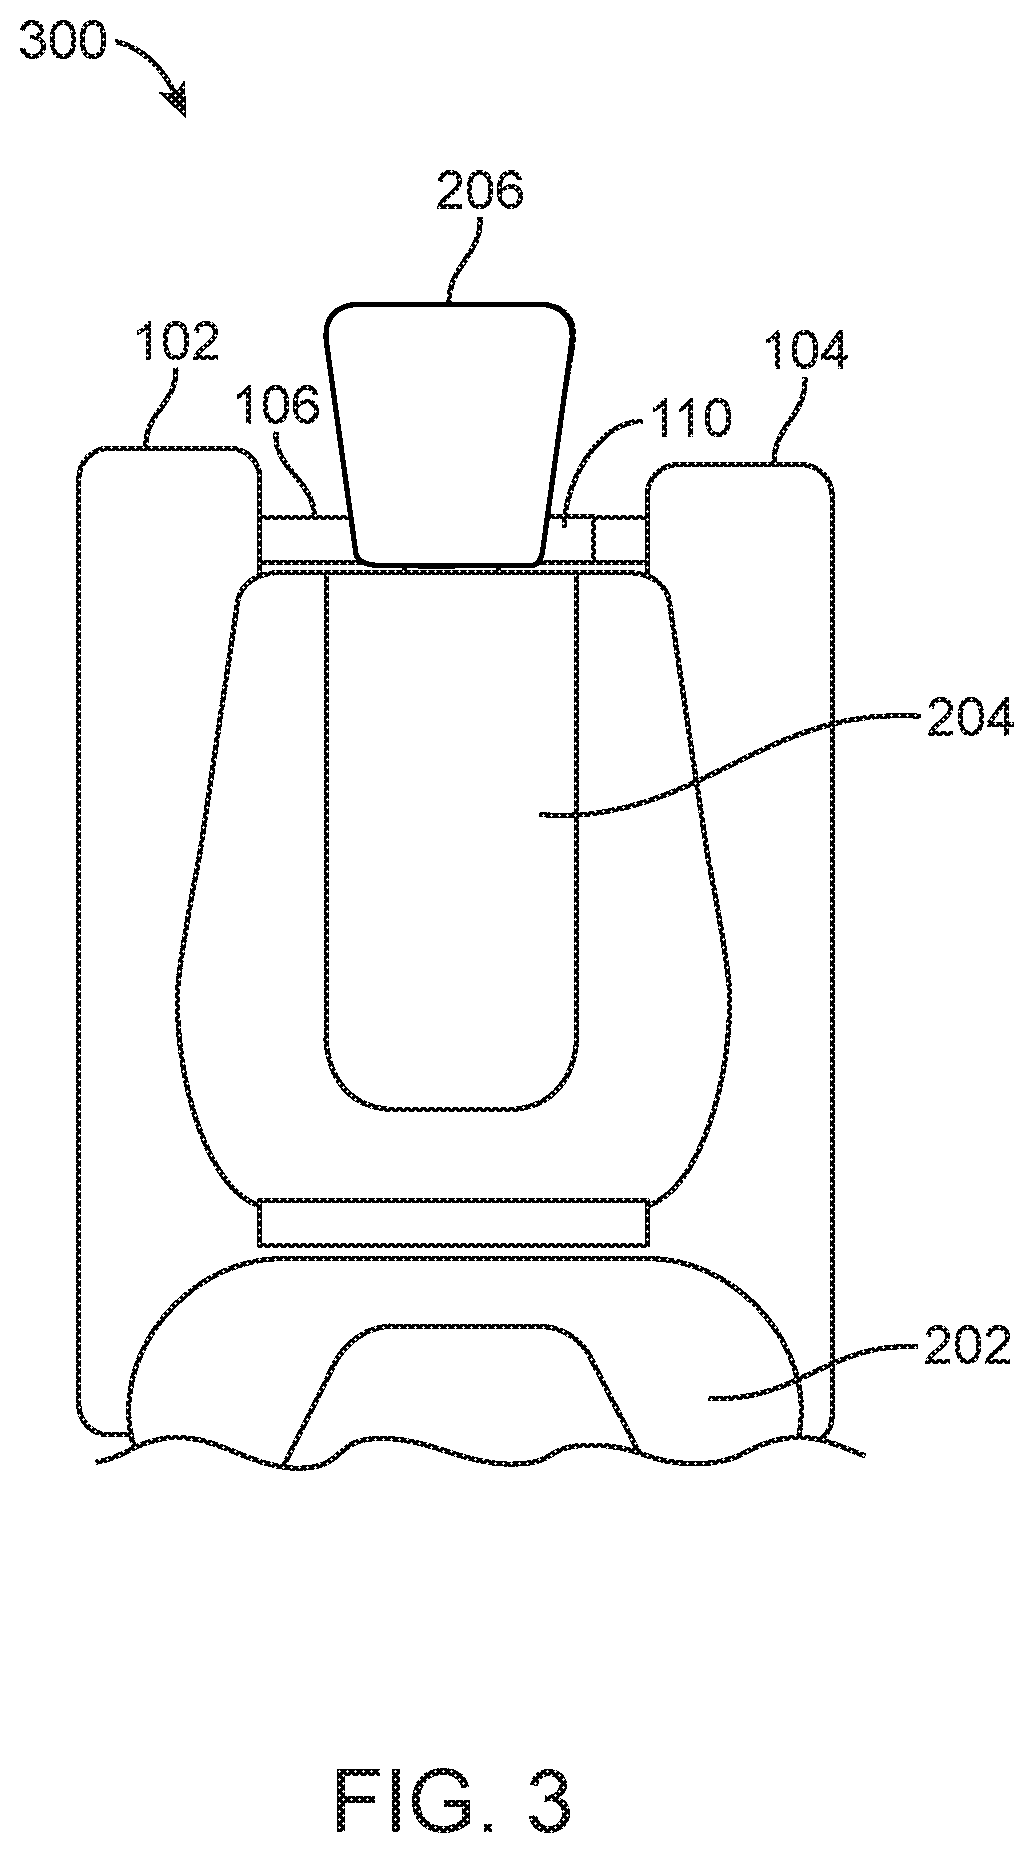 Portable support device and method of using the same